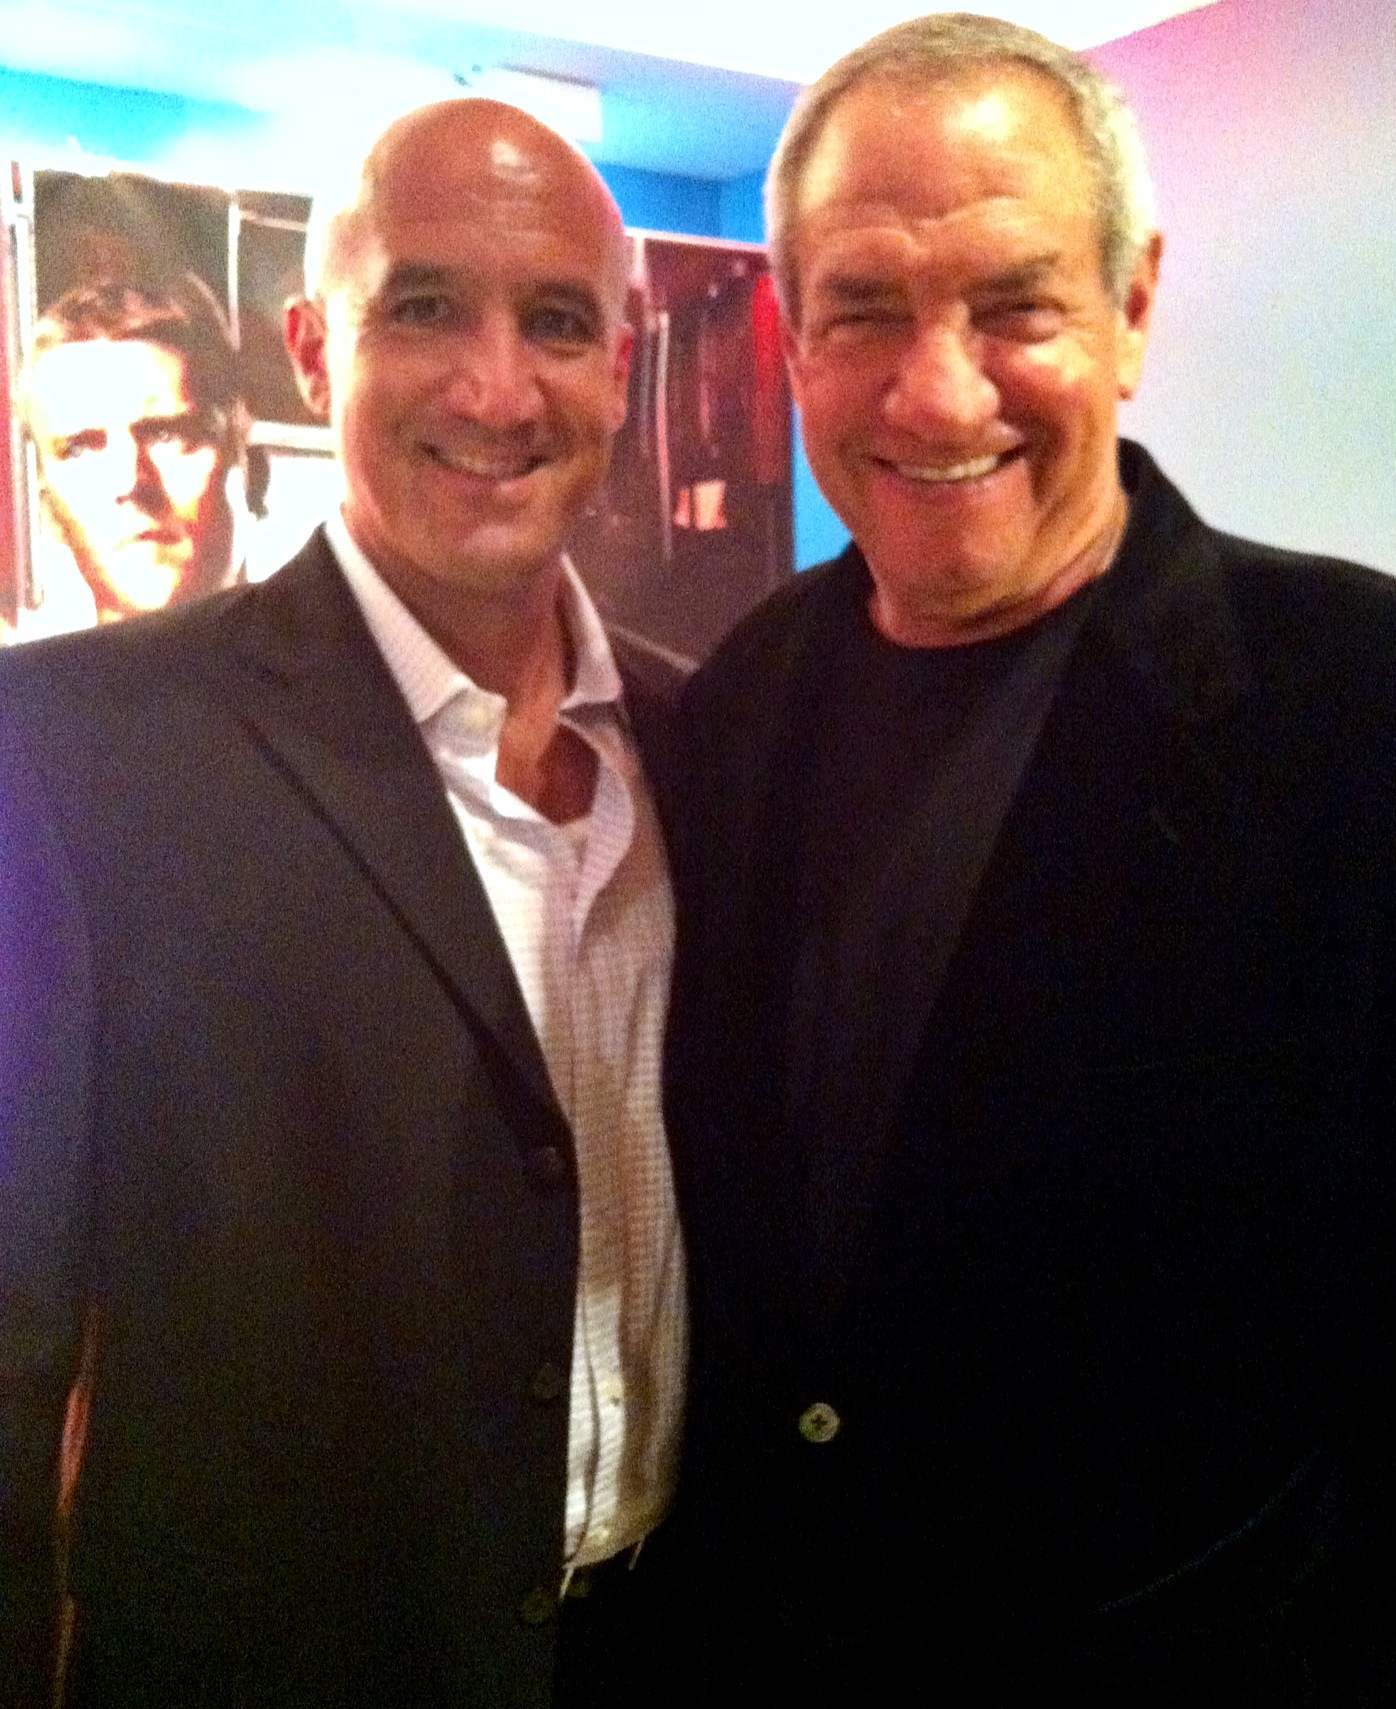 w/ Dick Wolf at the CHICAGO FIRE premiere